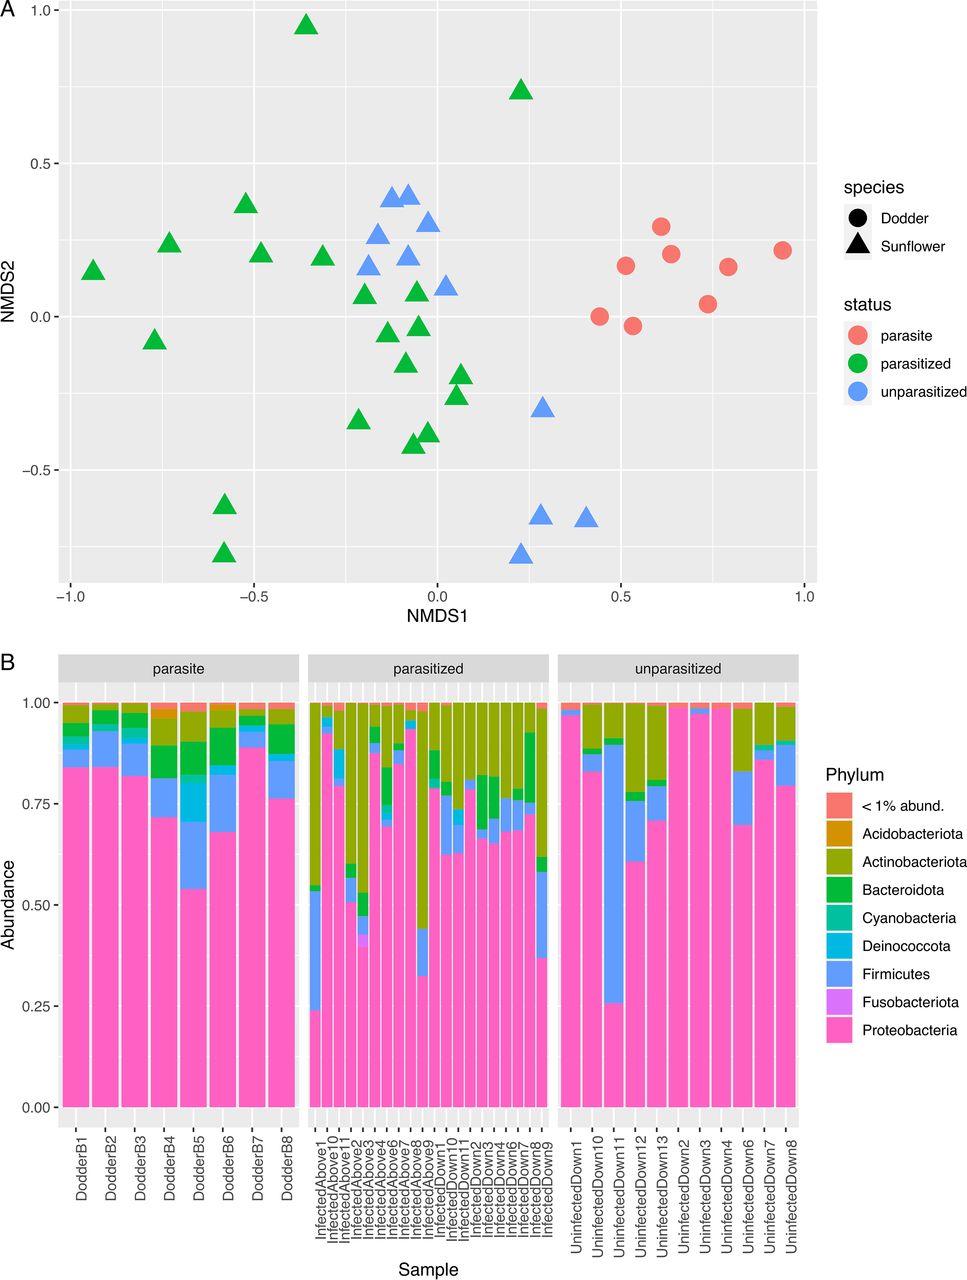 16S rRNA Gene Diversity of Bacterial Endophytes in Parasitic
            <i>Cuscuta campestris</i>
            and Its
            <i>Helianthus annuus</i>
            Host